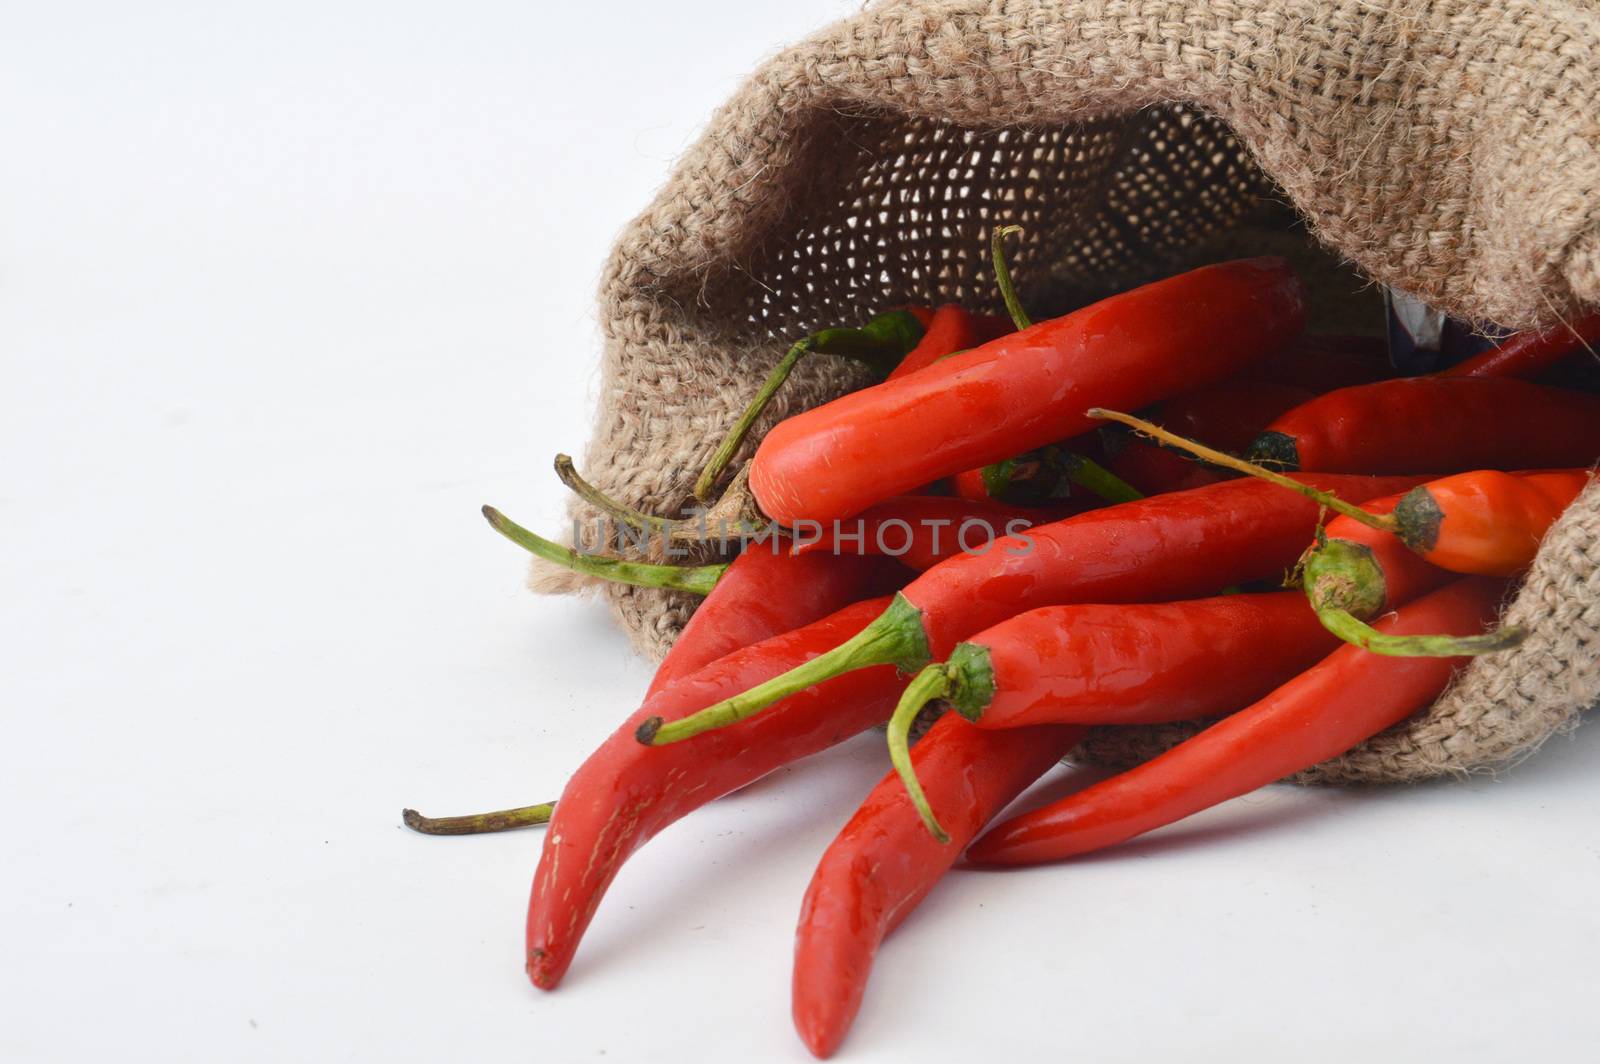 big chili red in a burlap sack on white background